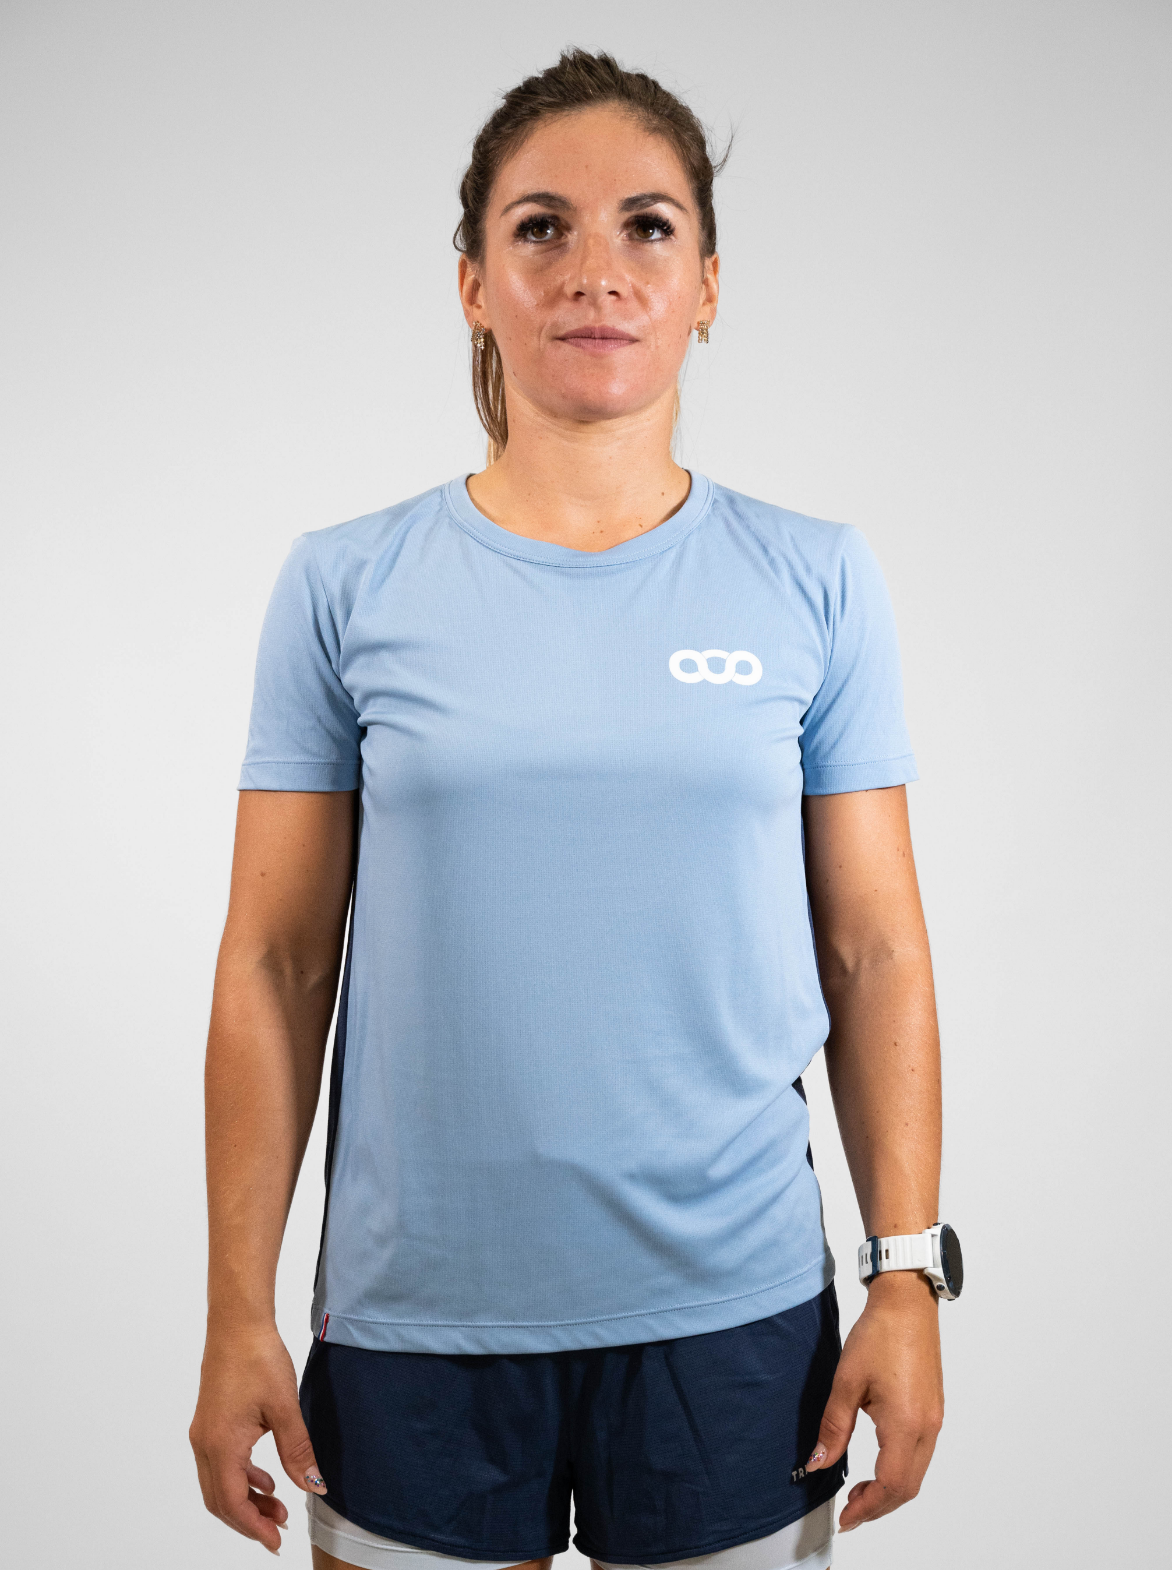 Women's Recycled and Eco-responsible Running T-Shirt — BOSA